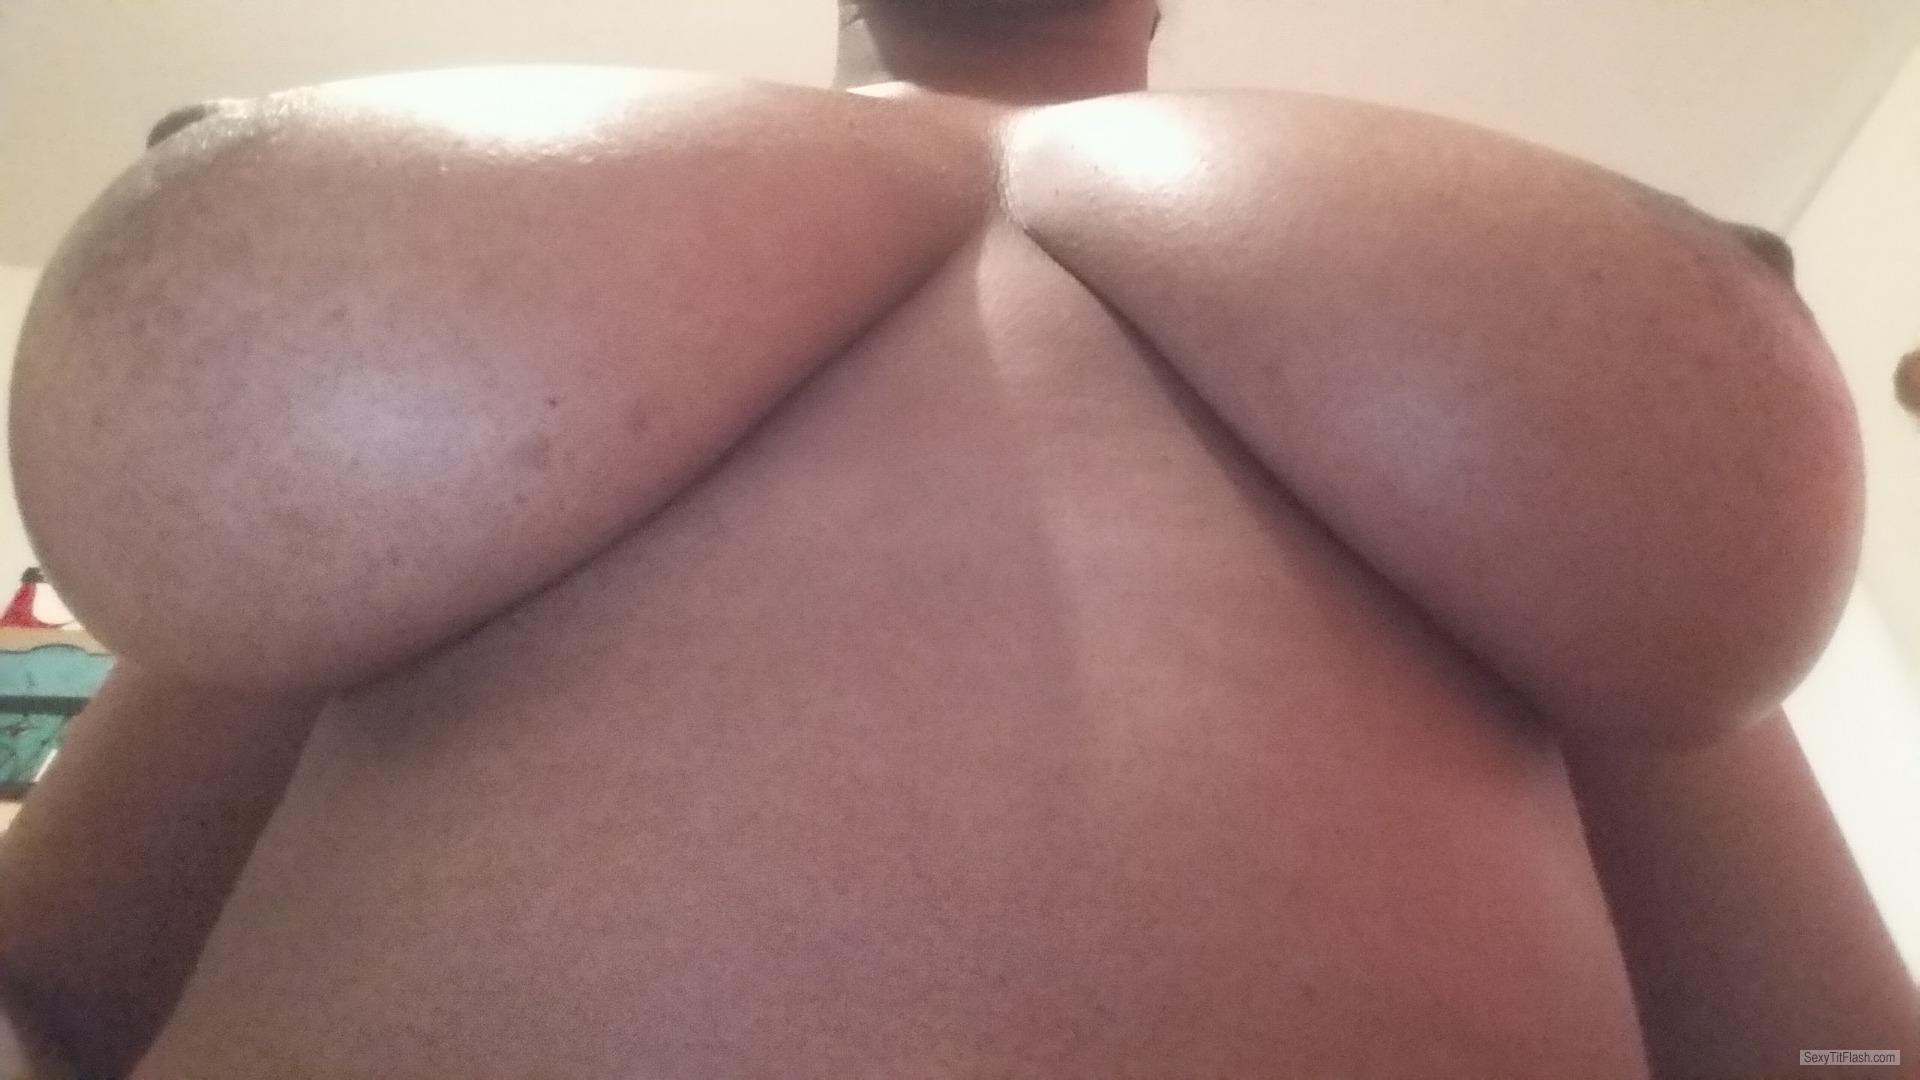 Tit Flash: My Big Tits (Selfie) - Hot African from United States